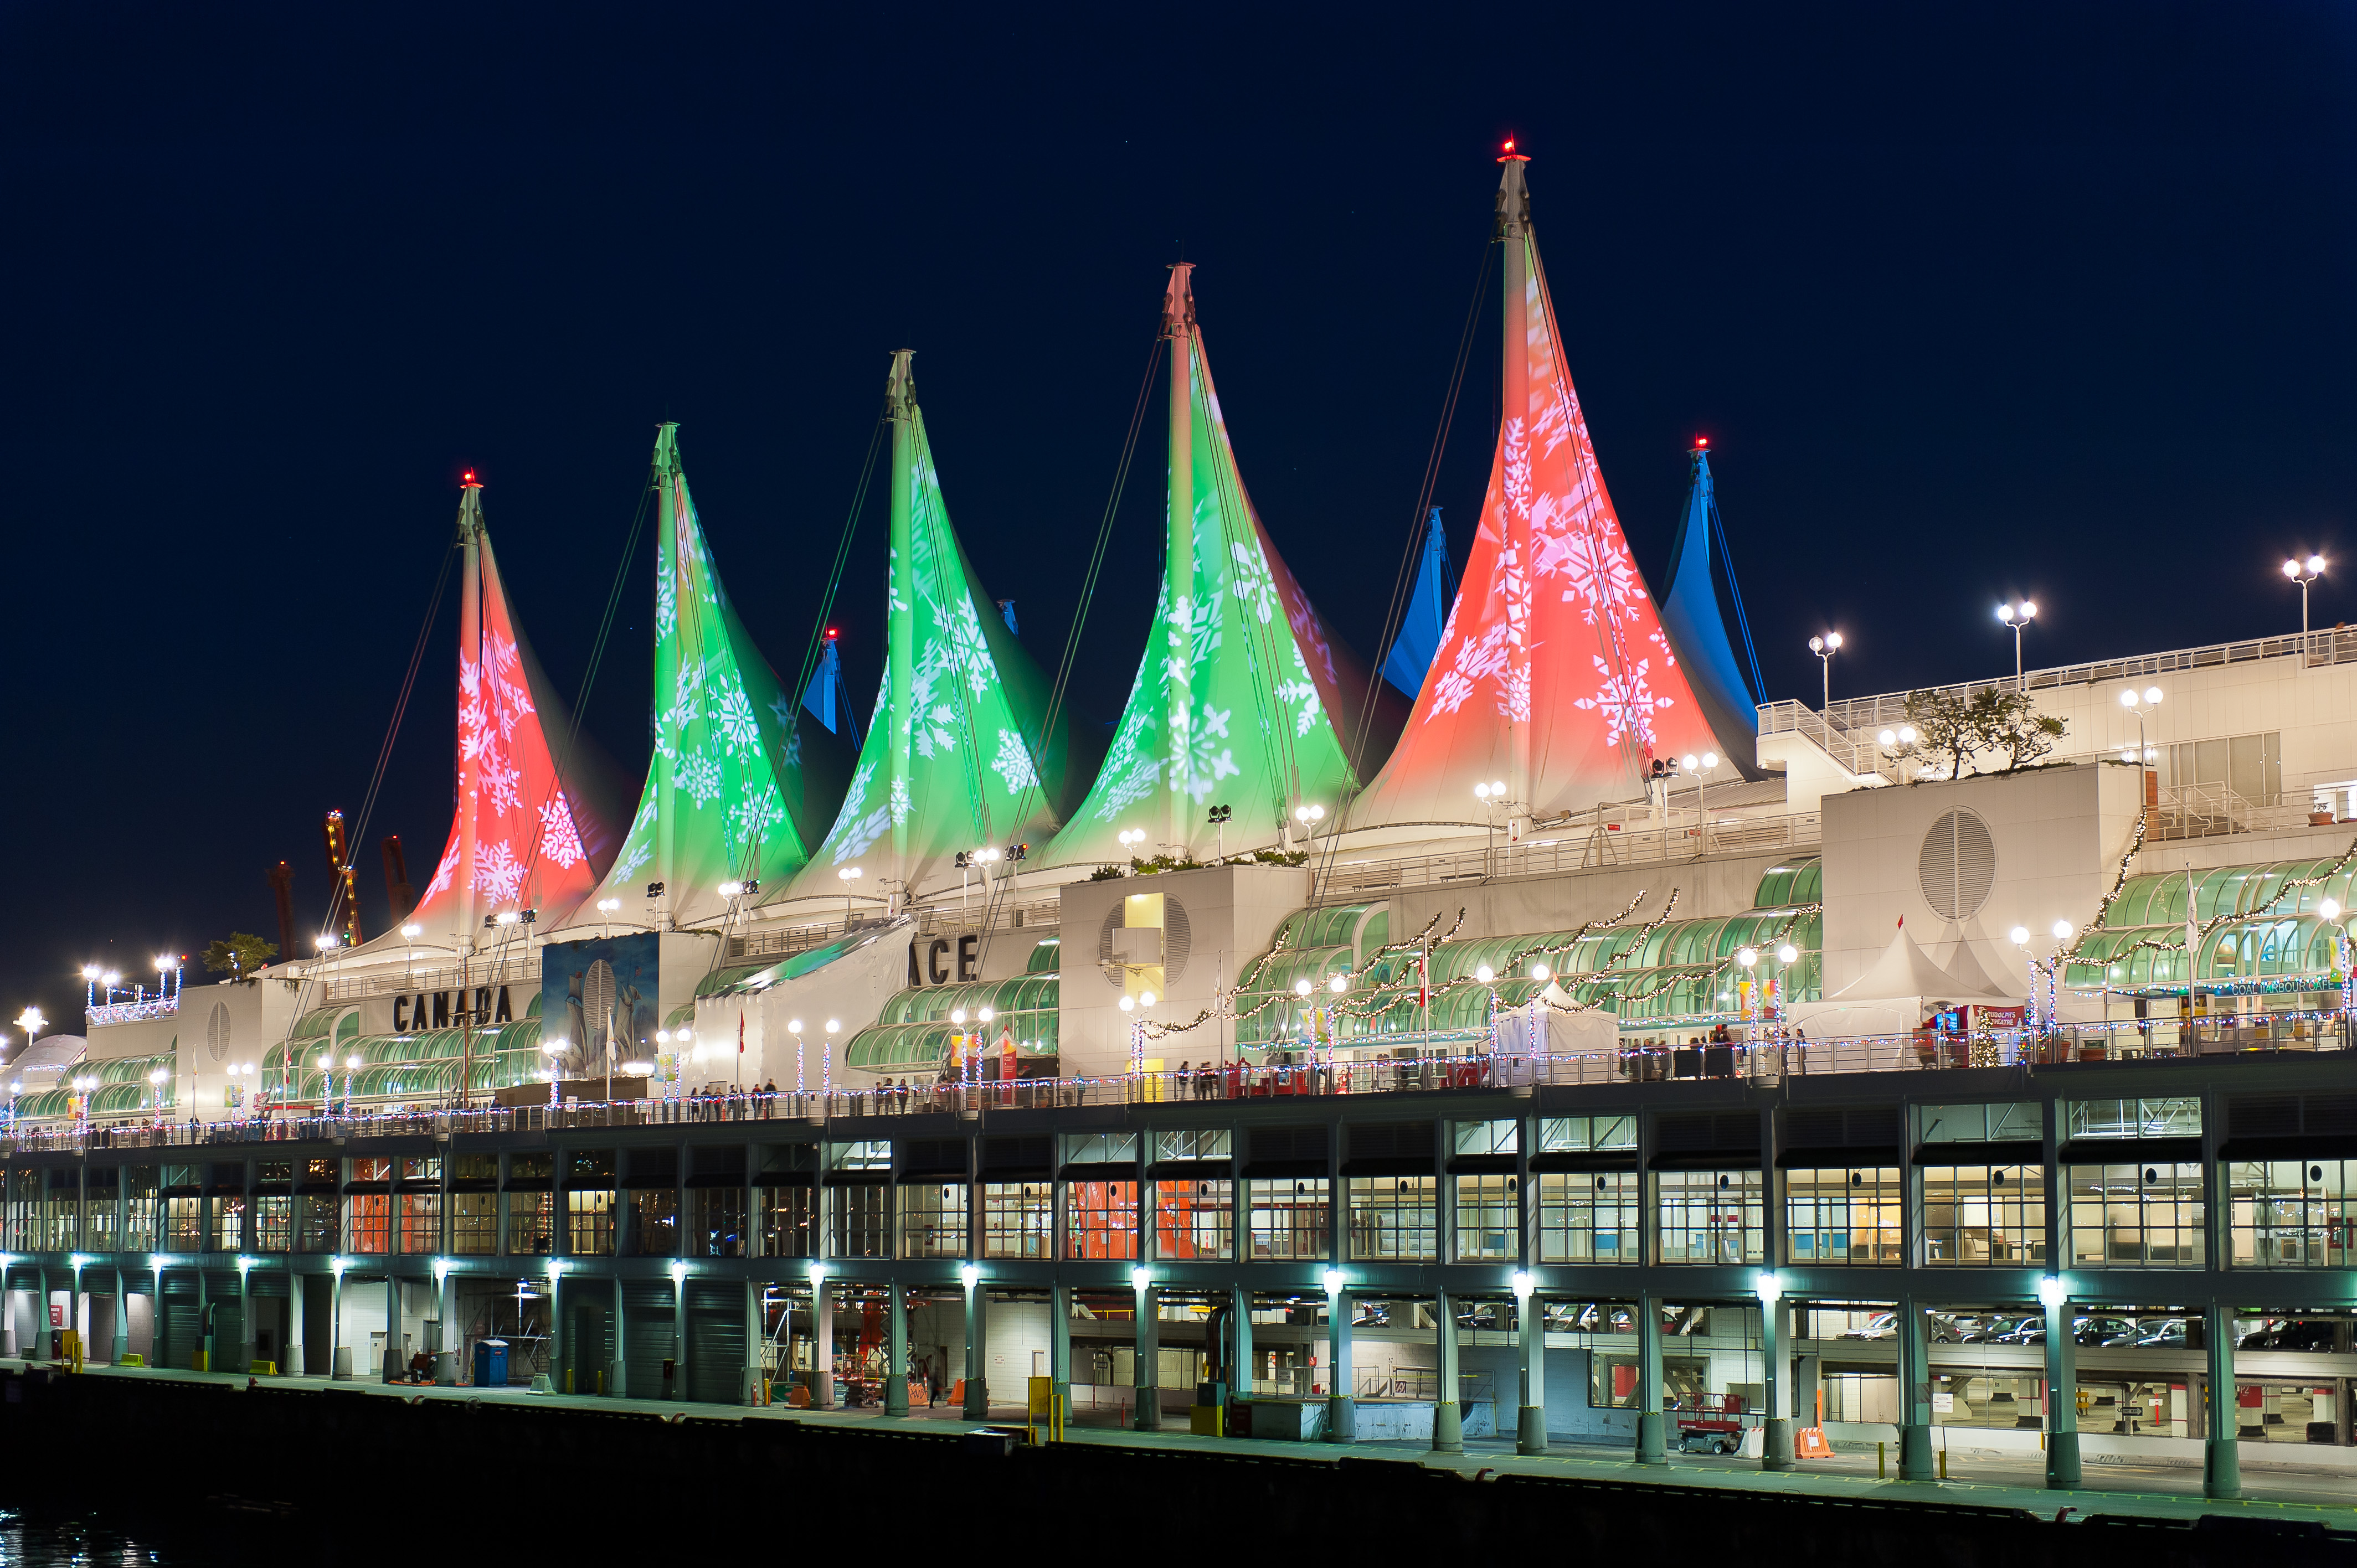 Christmas at Canada Place, presented by Port Metro Vancouver, to open Saturday – Canada Place